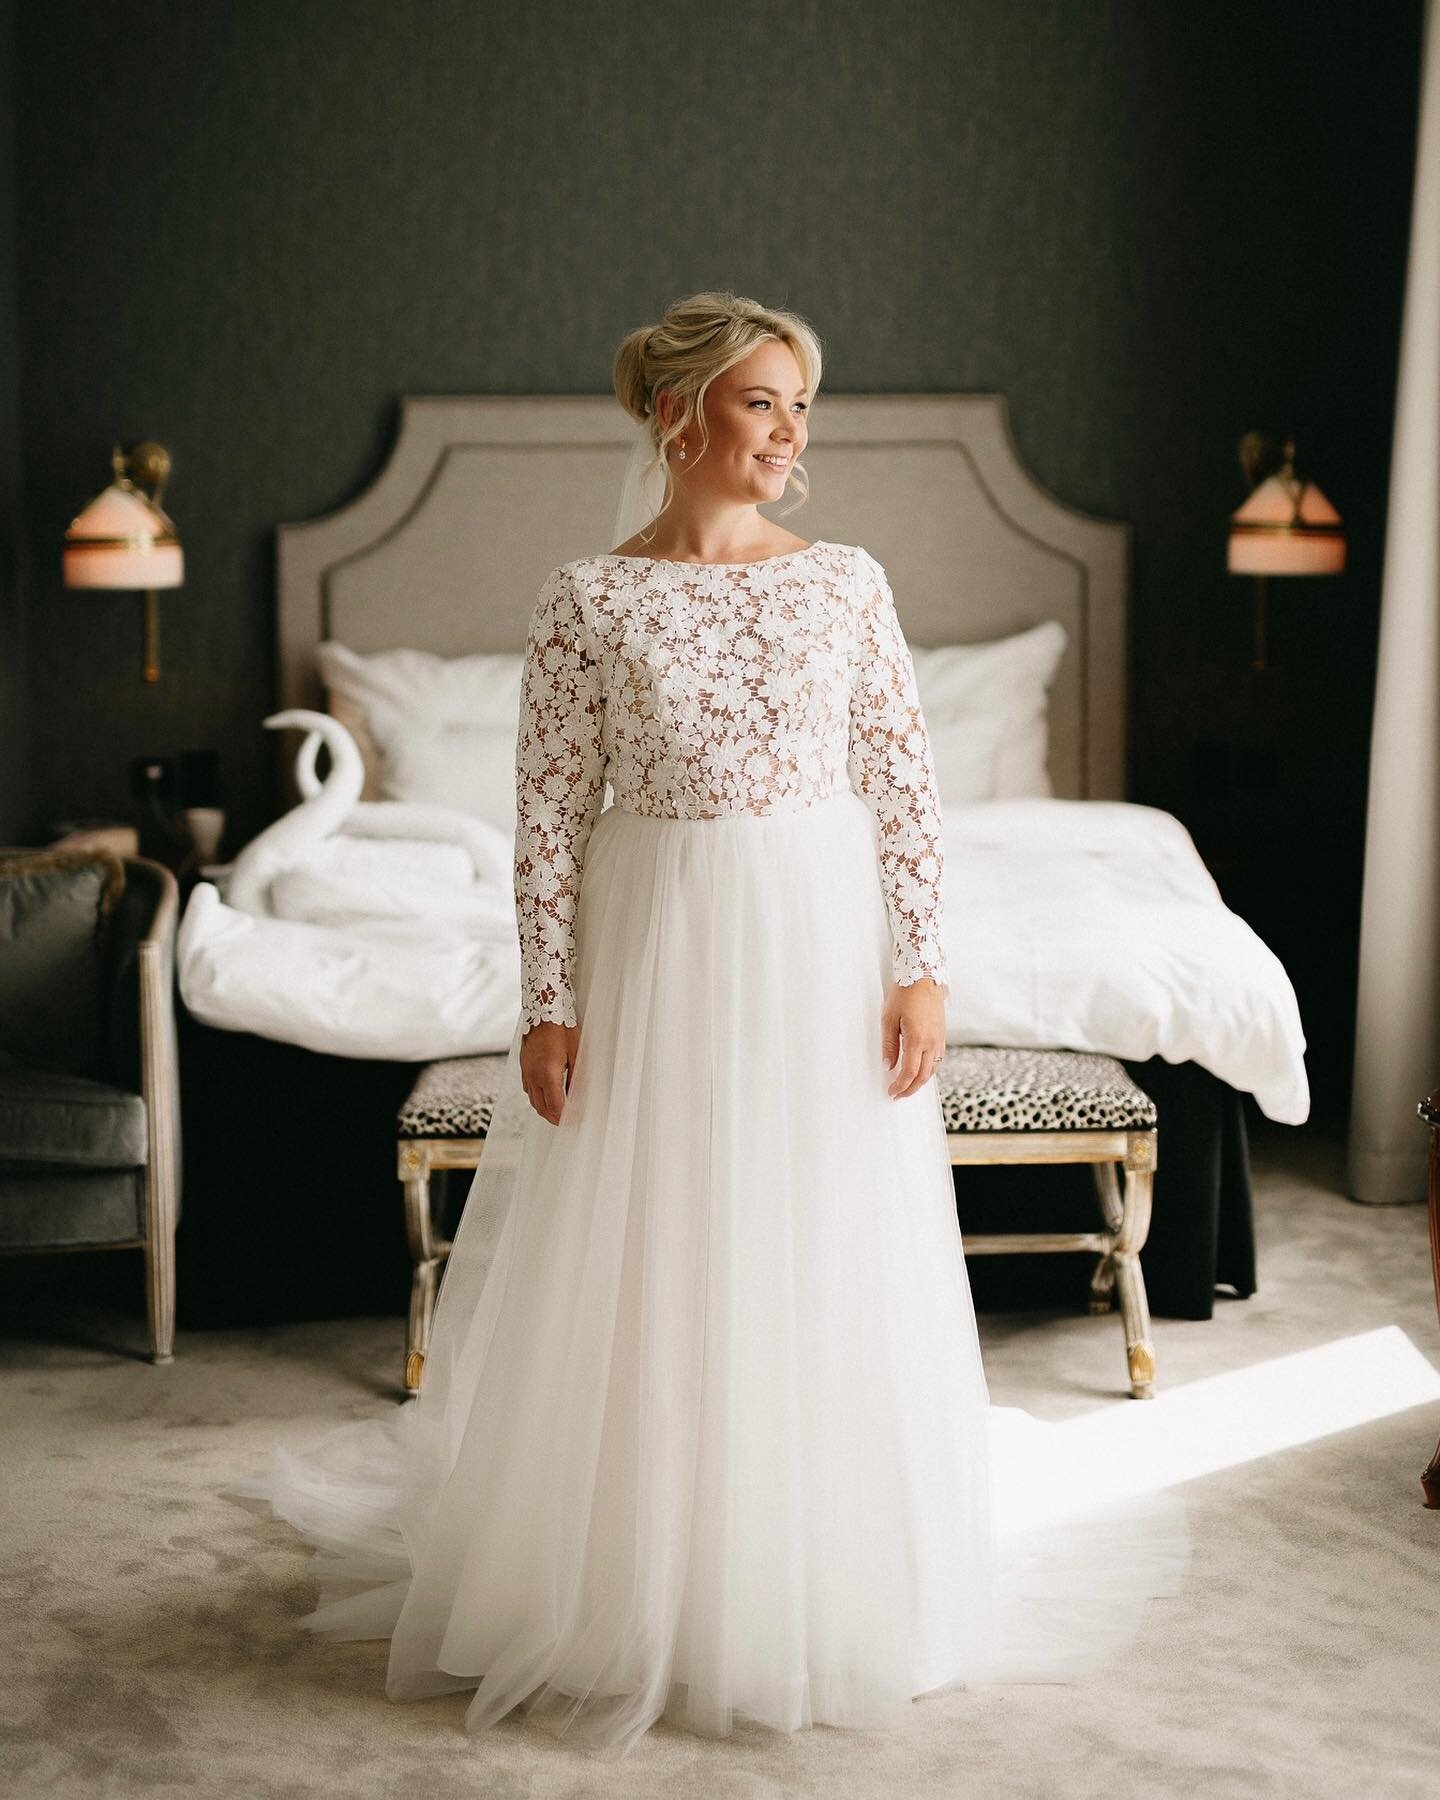 Stavanger, Norway 🇳🇴 the first stop on a crazy week of back to back abroad weddings in Norway, France &amp; Rhodes in the peak of summer 📸 @kirstyemmatipping looking gorgeous in the bridal suite before we headed to the church to meet up with the m